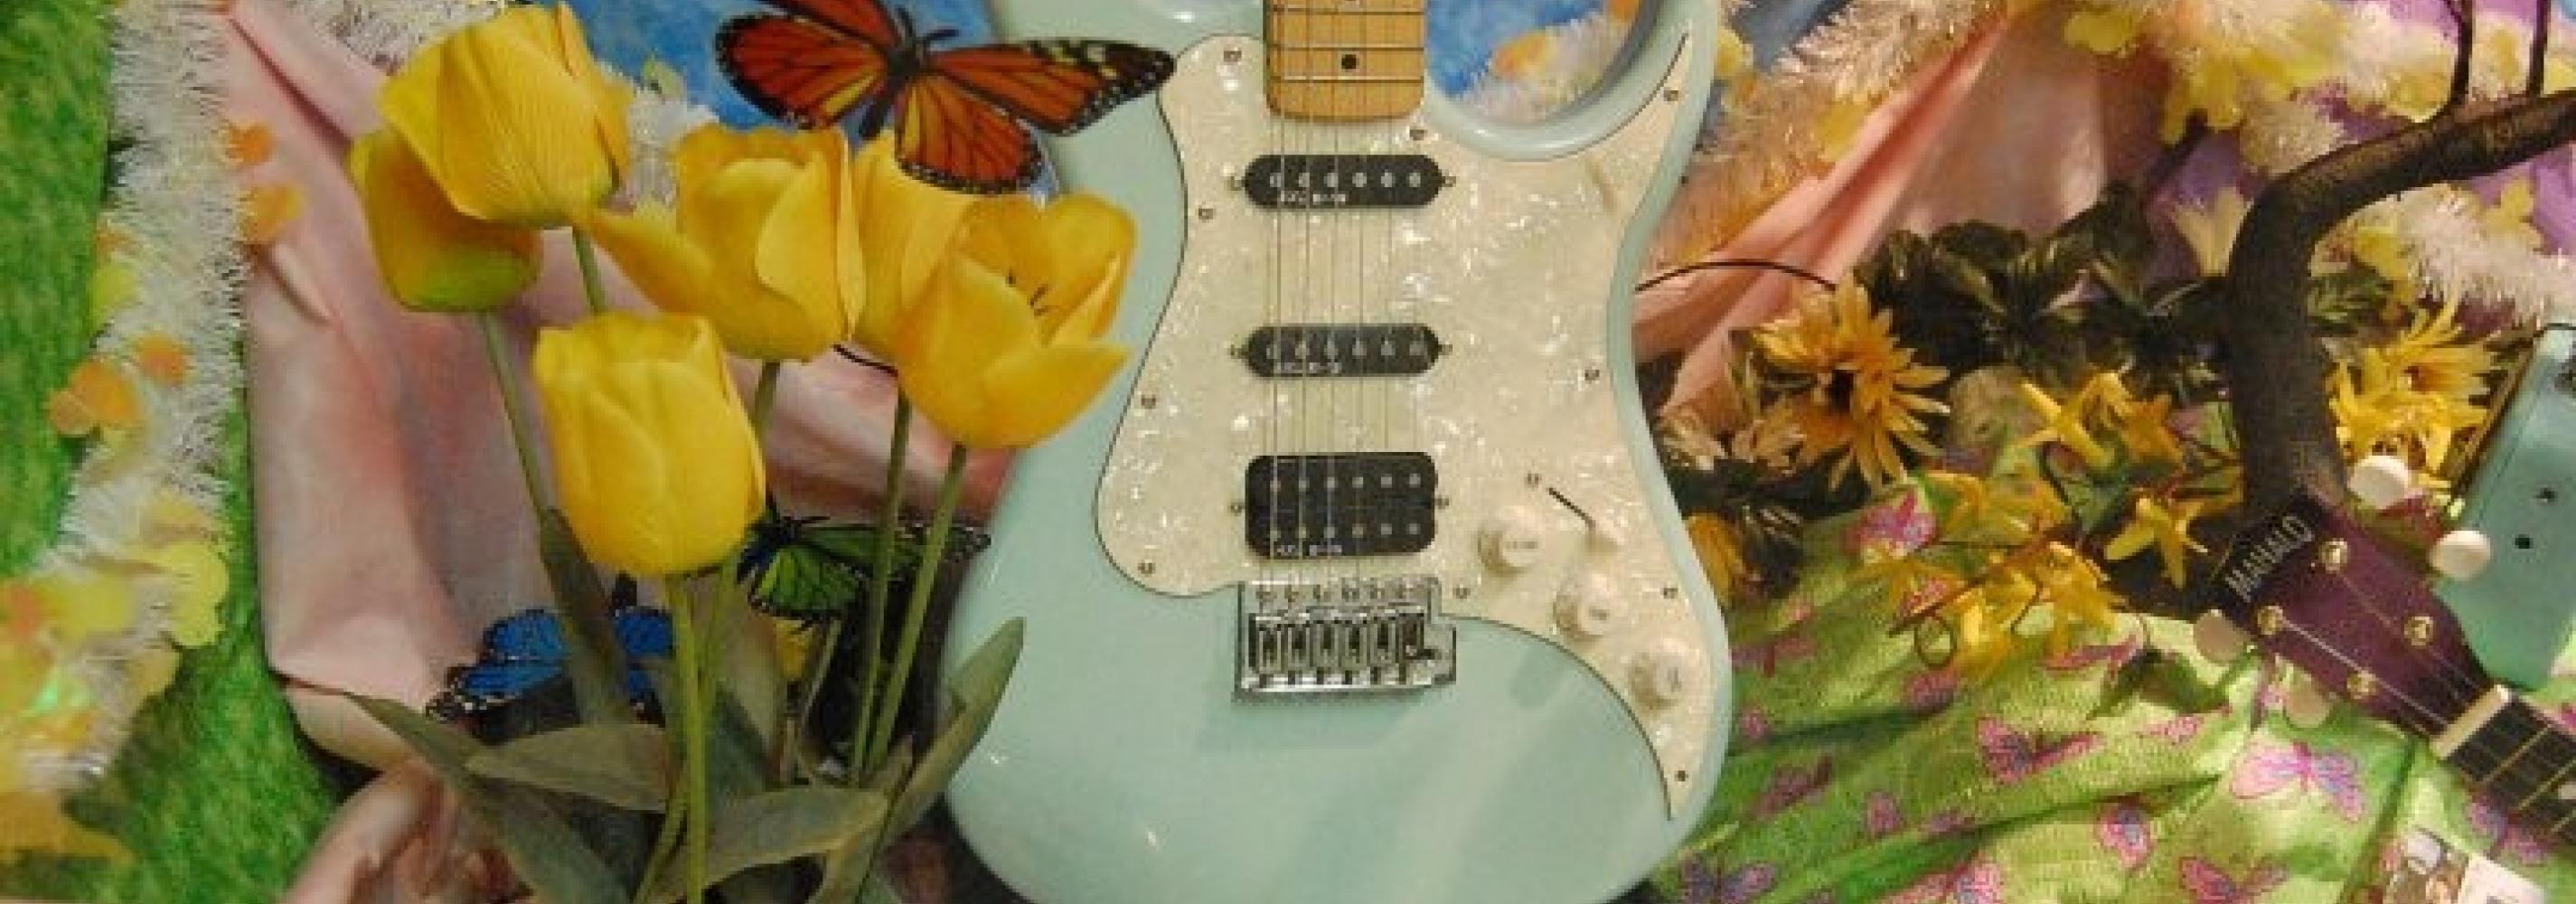 LIGHT BLUE GUITAR WITH SPRING THEME